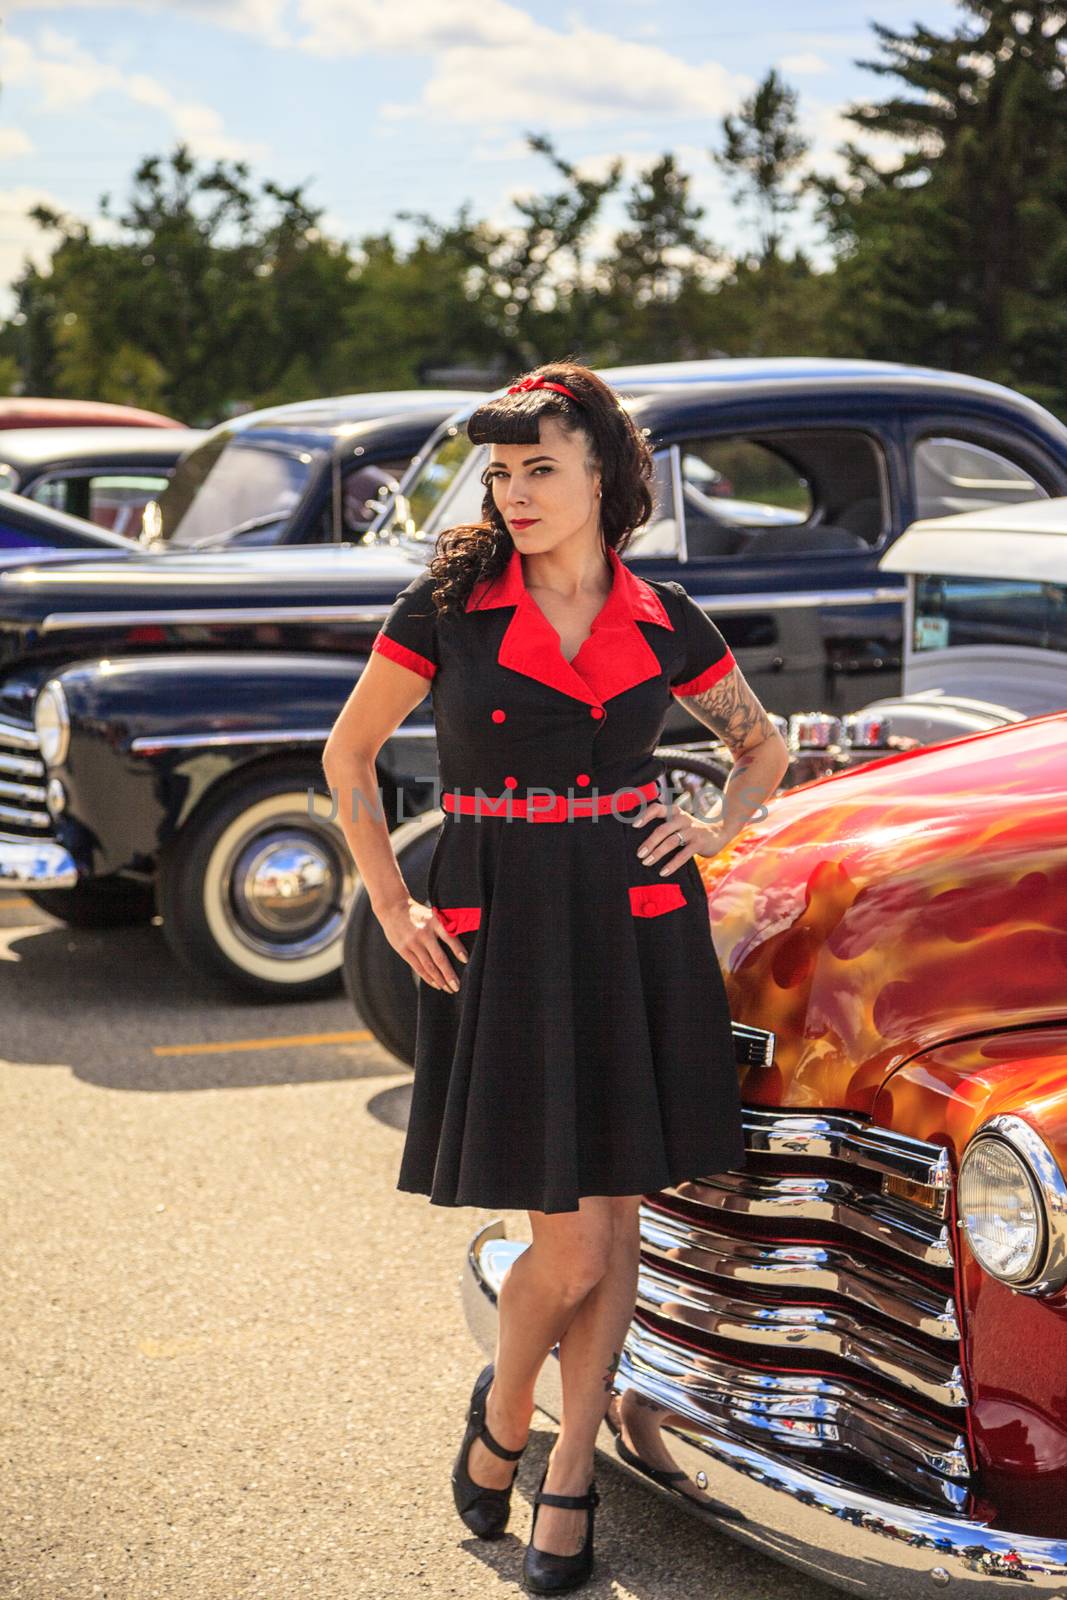 THORNCLIFF CALGARY CANADA, SEPT 13 2014: The annual Show and Shine with Pin Up Girls "Cars before 1964"